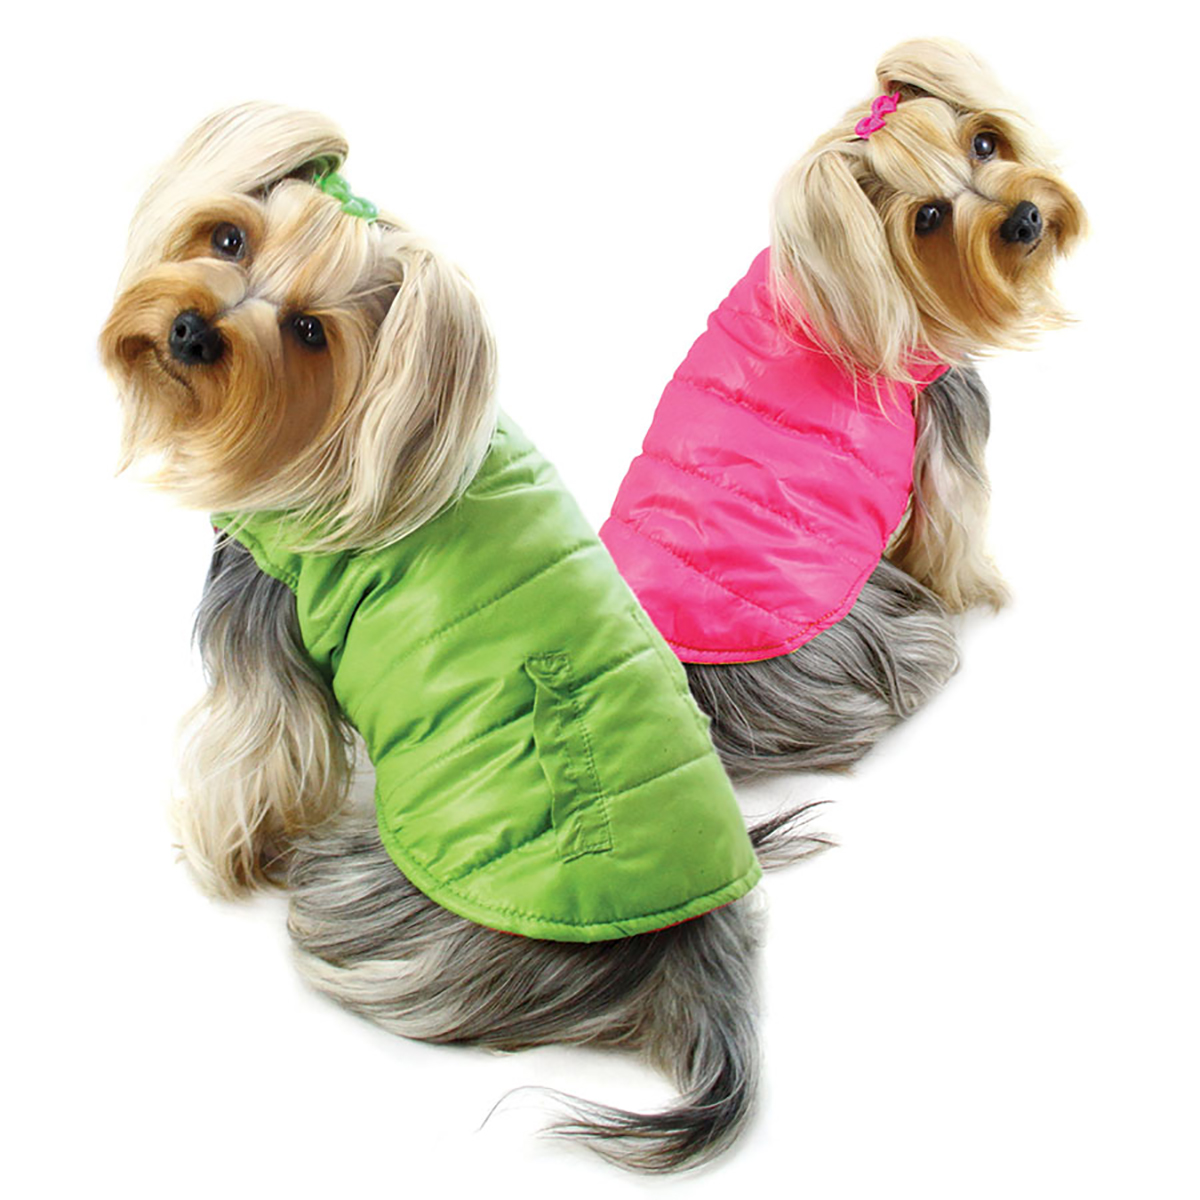 Klippo Reversible Parka Dog Vest with Ruffle Trim - Lime and Pink